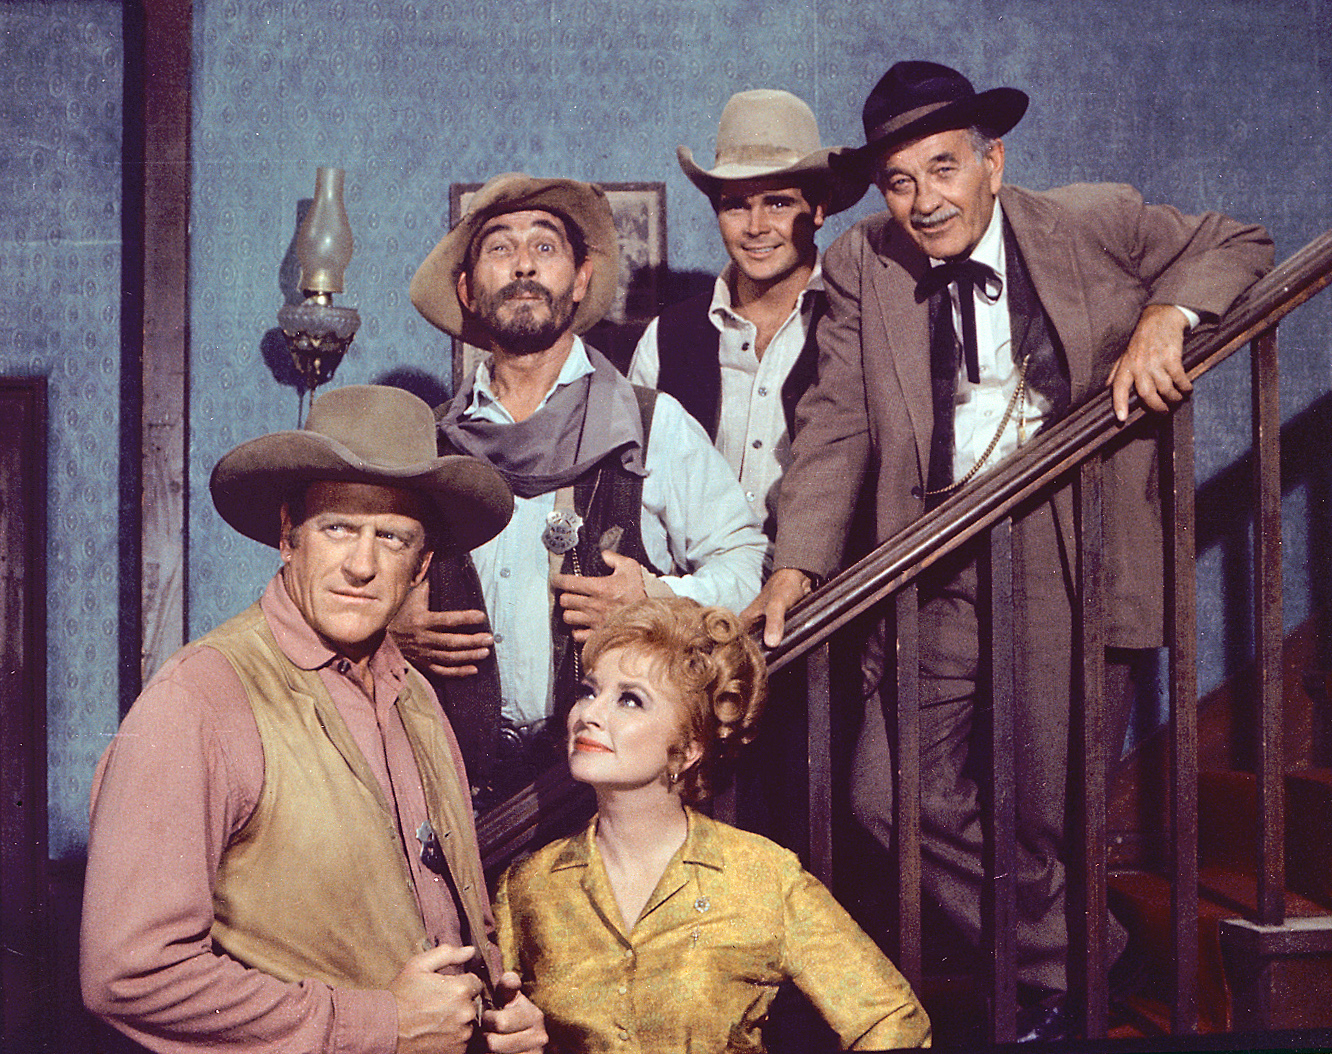 Buck Taylor and his co-stars in the TV series "Gunsmoke" on July 23, 1969 | Source: Getty Images